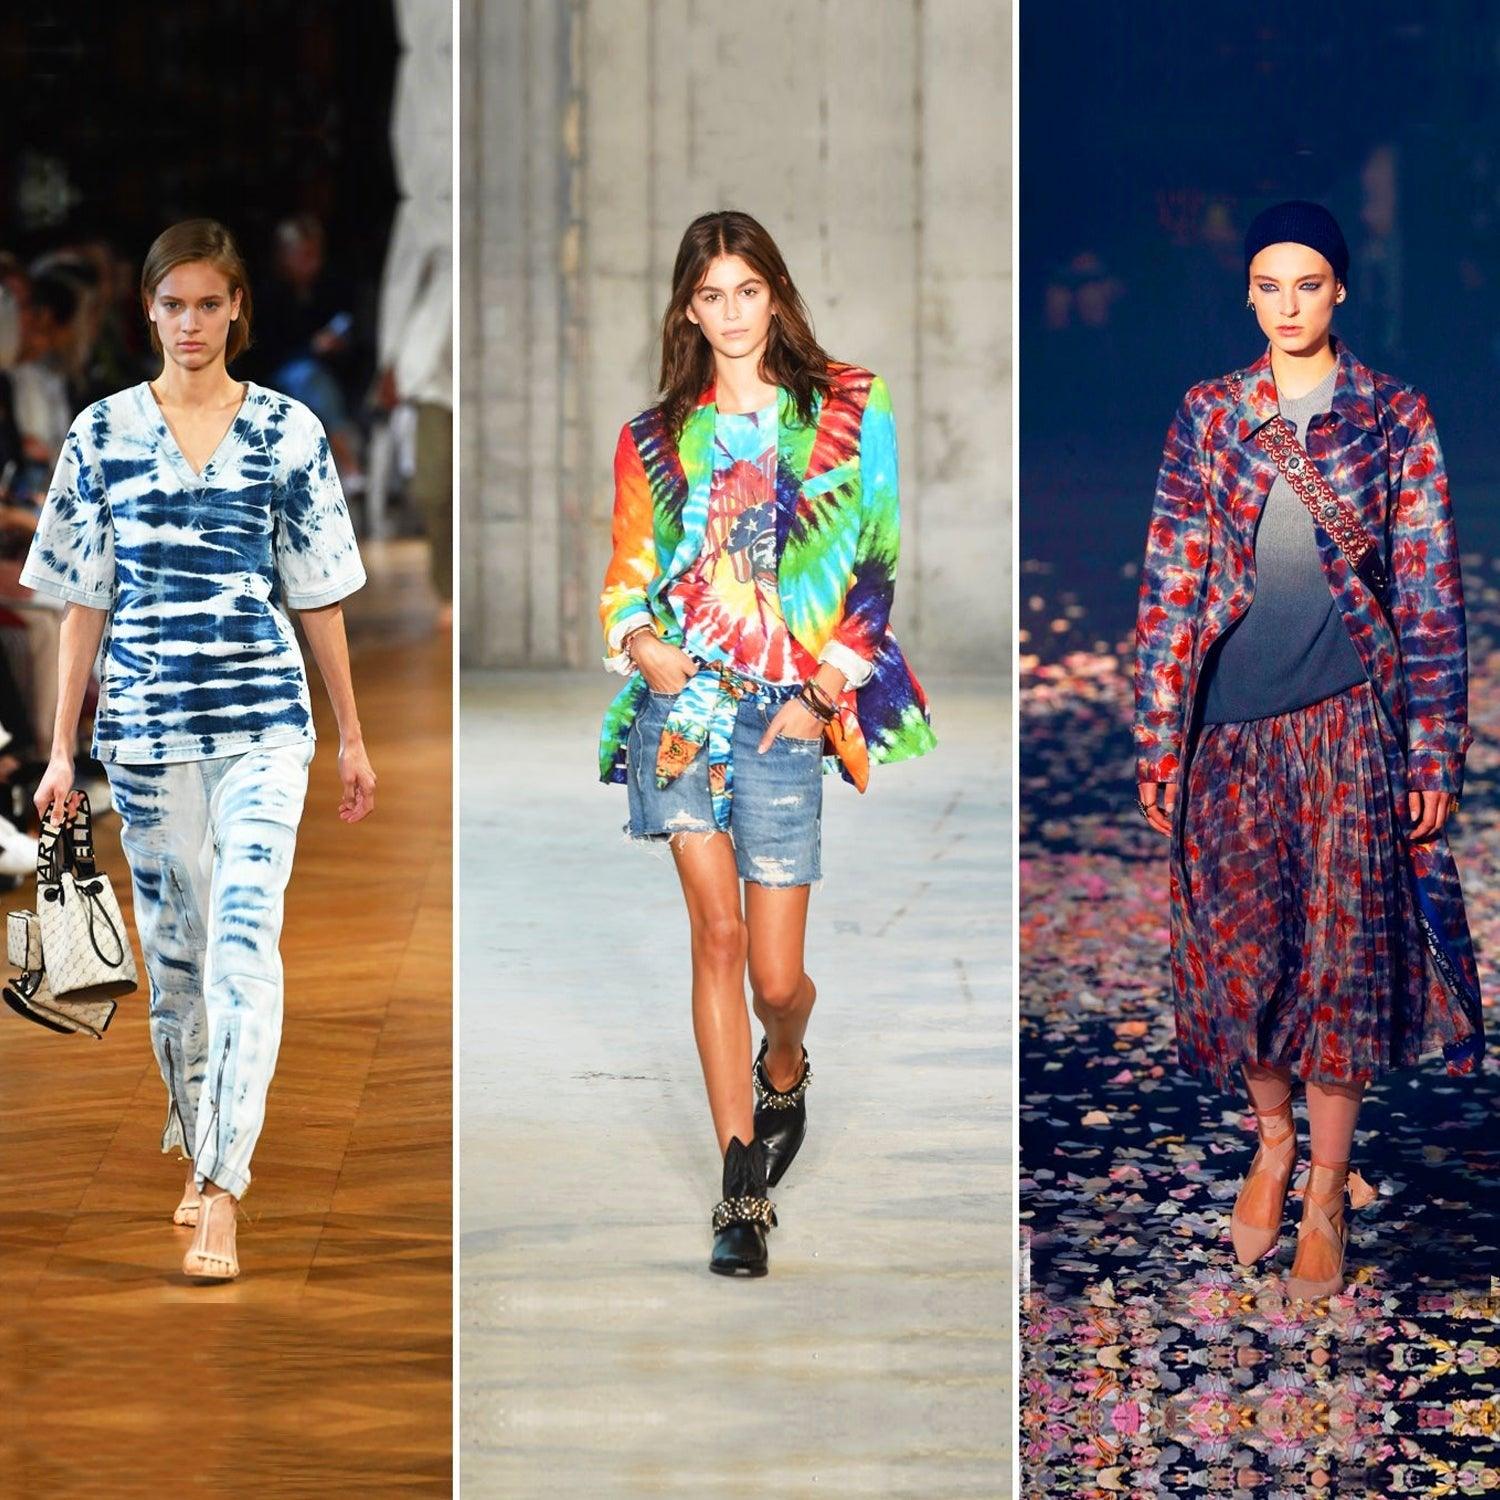 Tie-dye continues to trend on the Paris runways with a